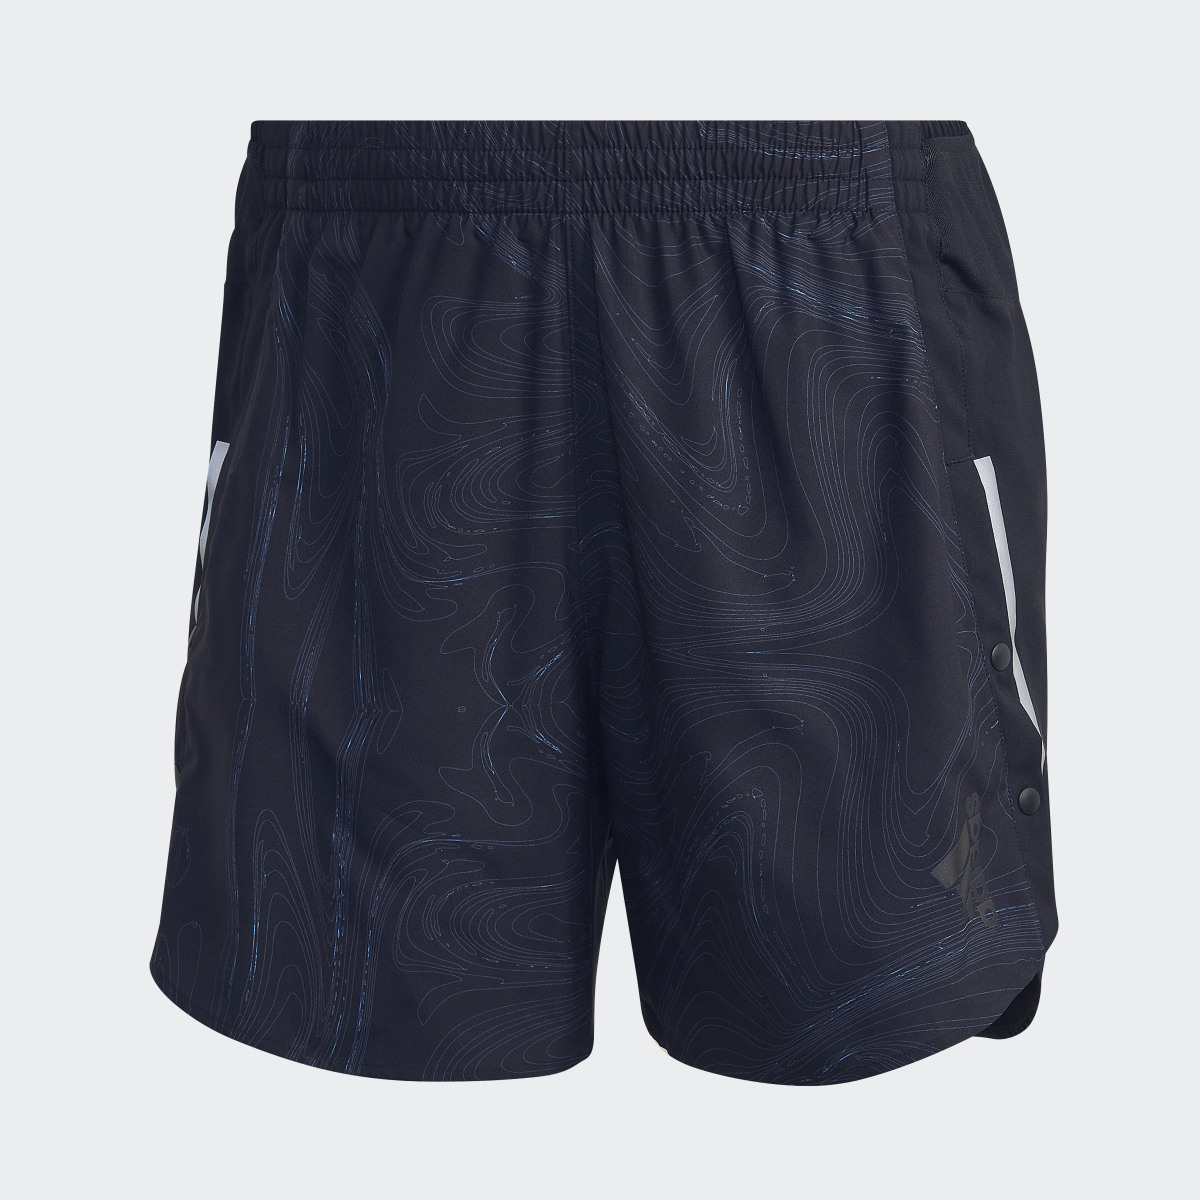 Adidas Shorts Designed for Running for the Oceans. 4